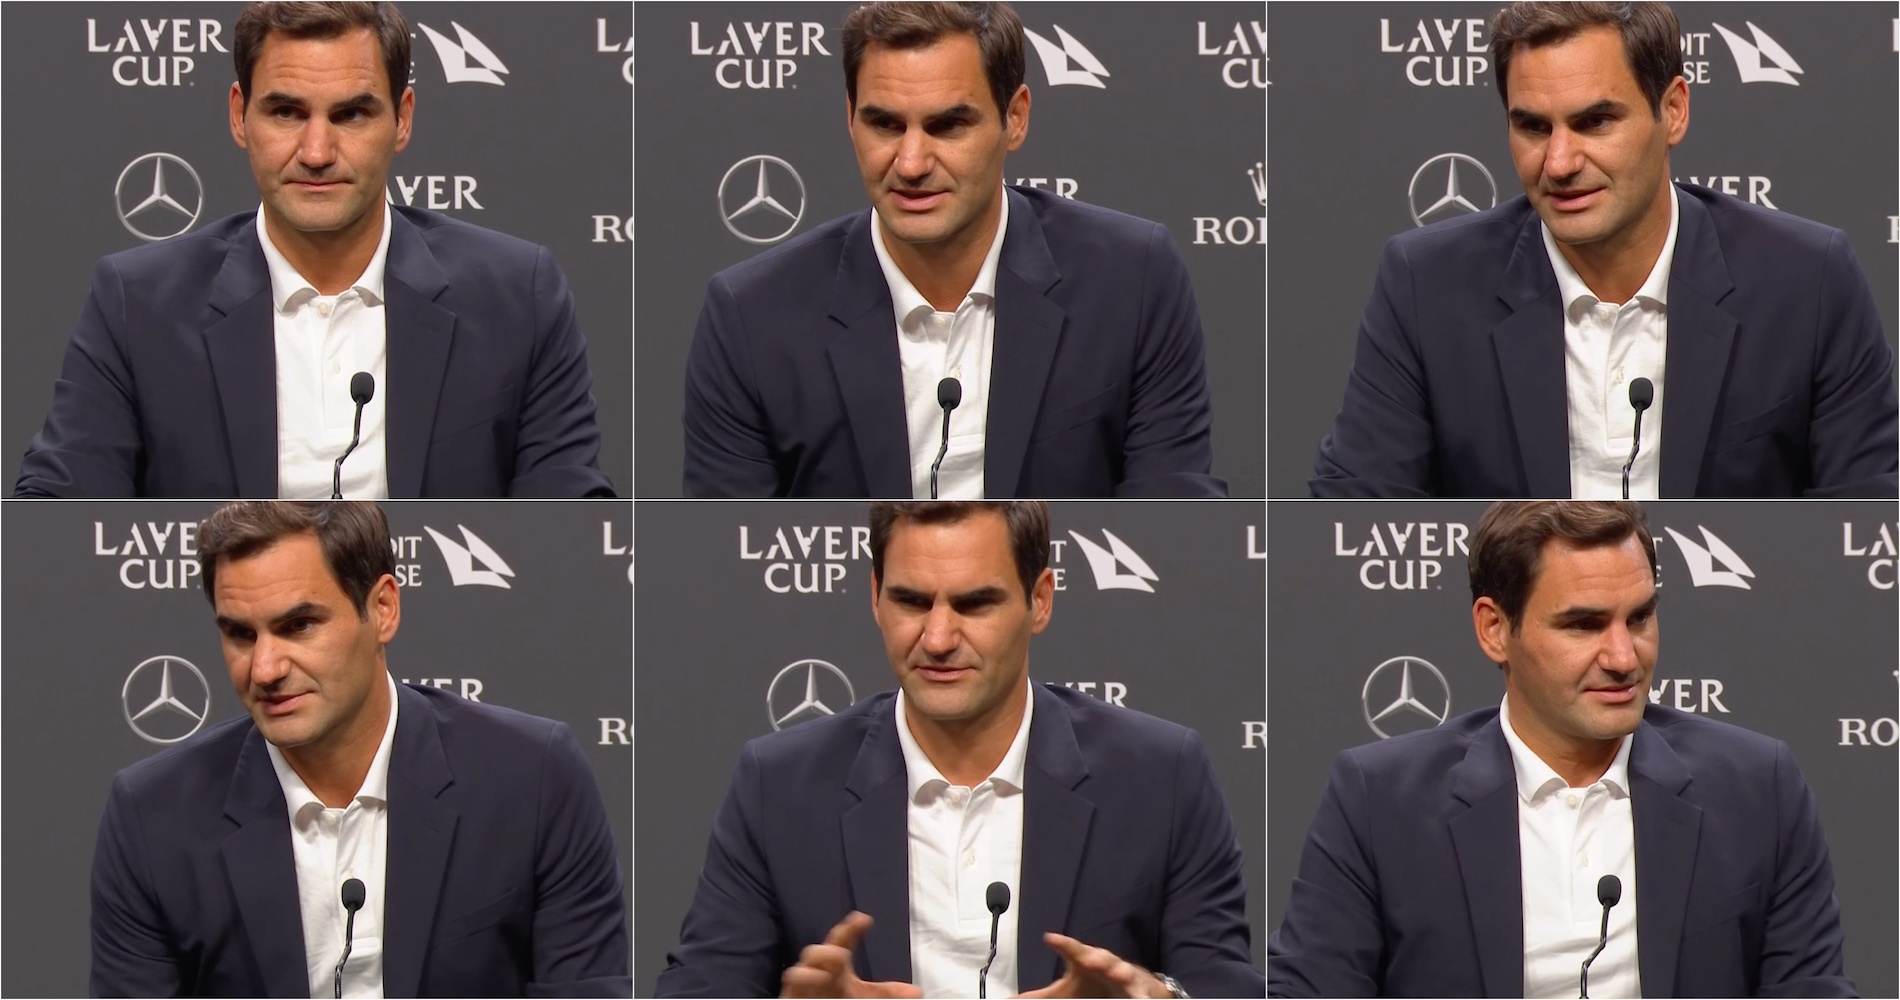 Roger Federer, stated that he's exiting the sport - THE CEO